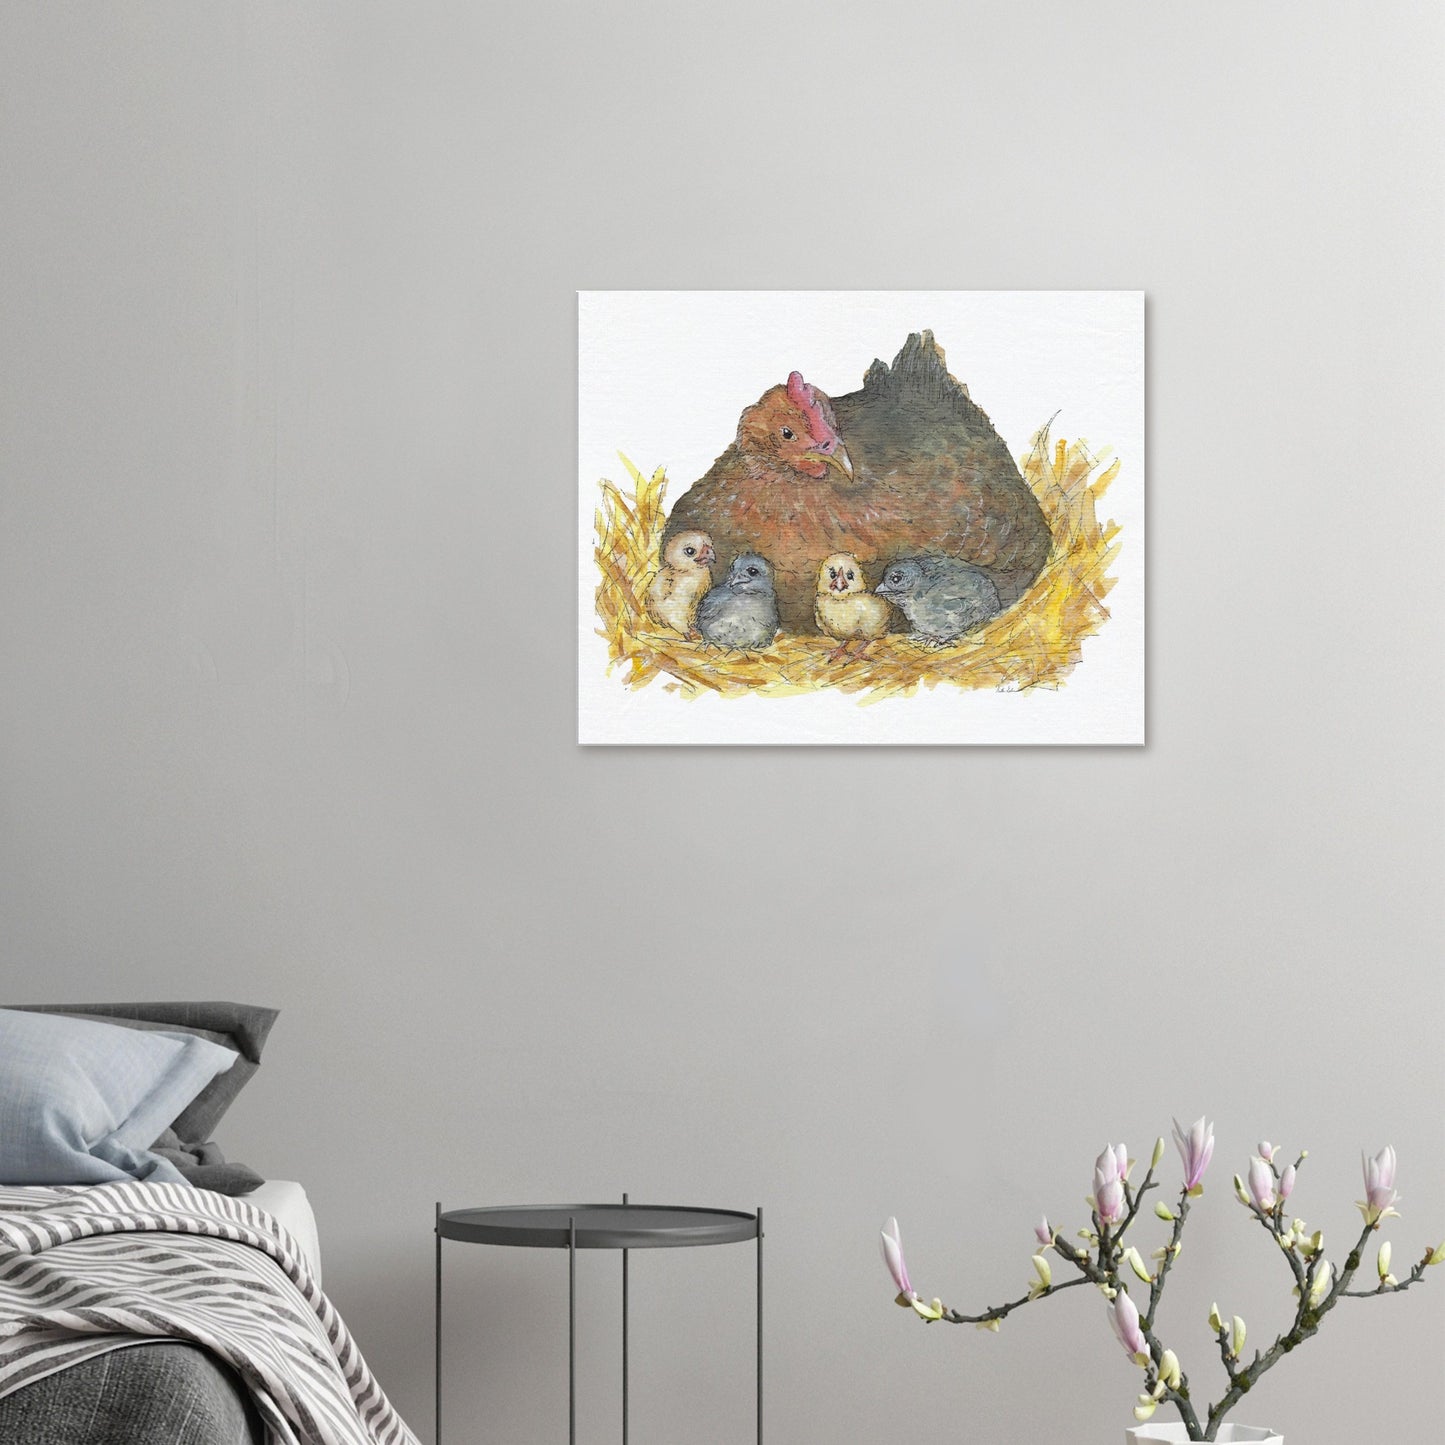 24 by 30 inch slim canvas Mother Hen print. Features a watercolor mother hen and her four chicks in a nest. Shown on wall above bed, grey side table, and blooming branch.